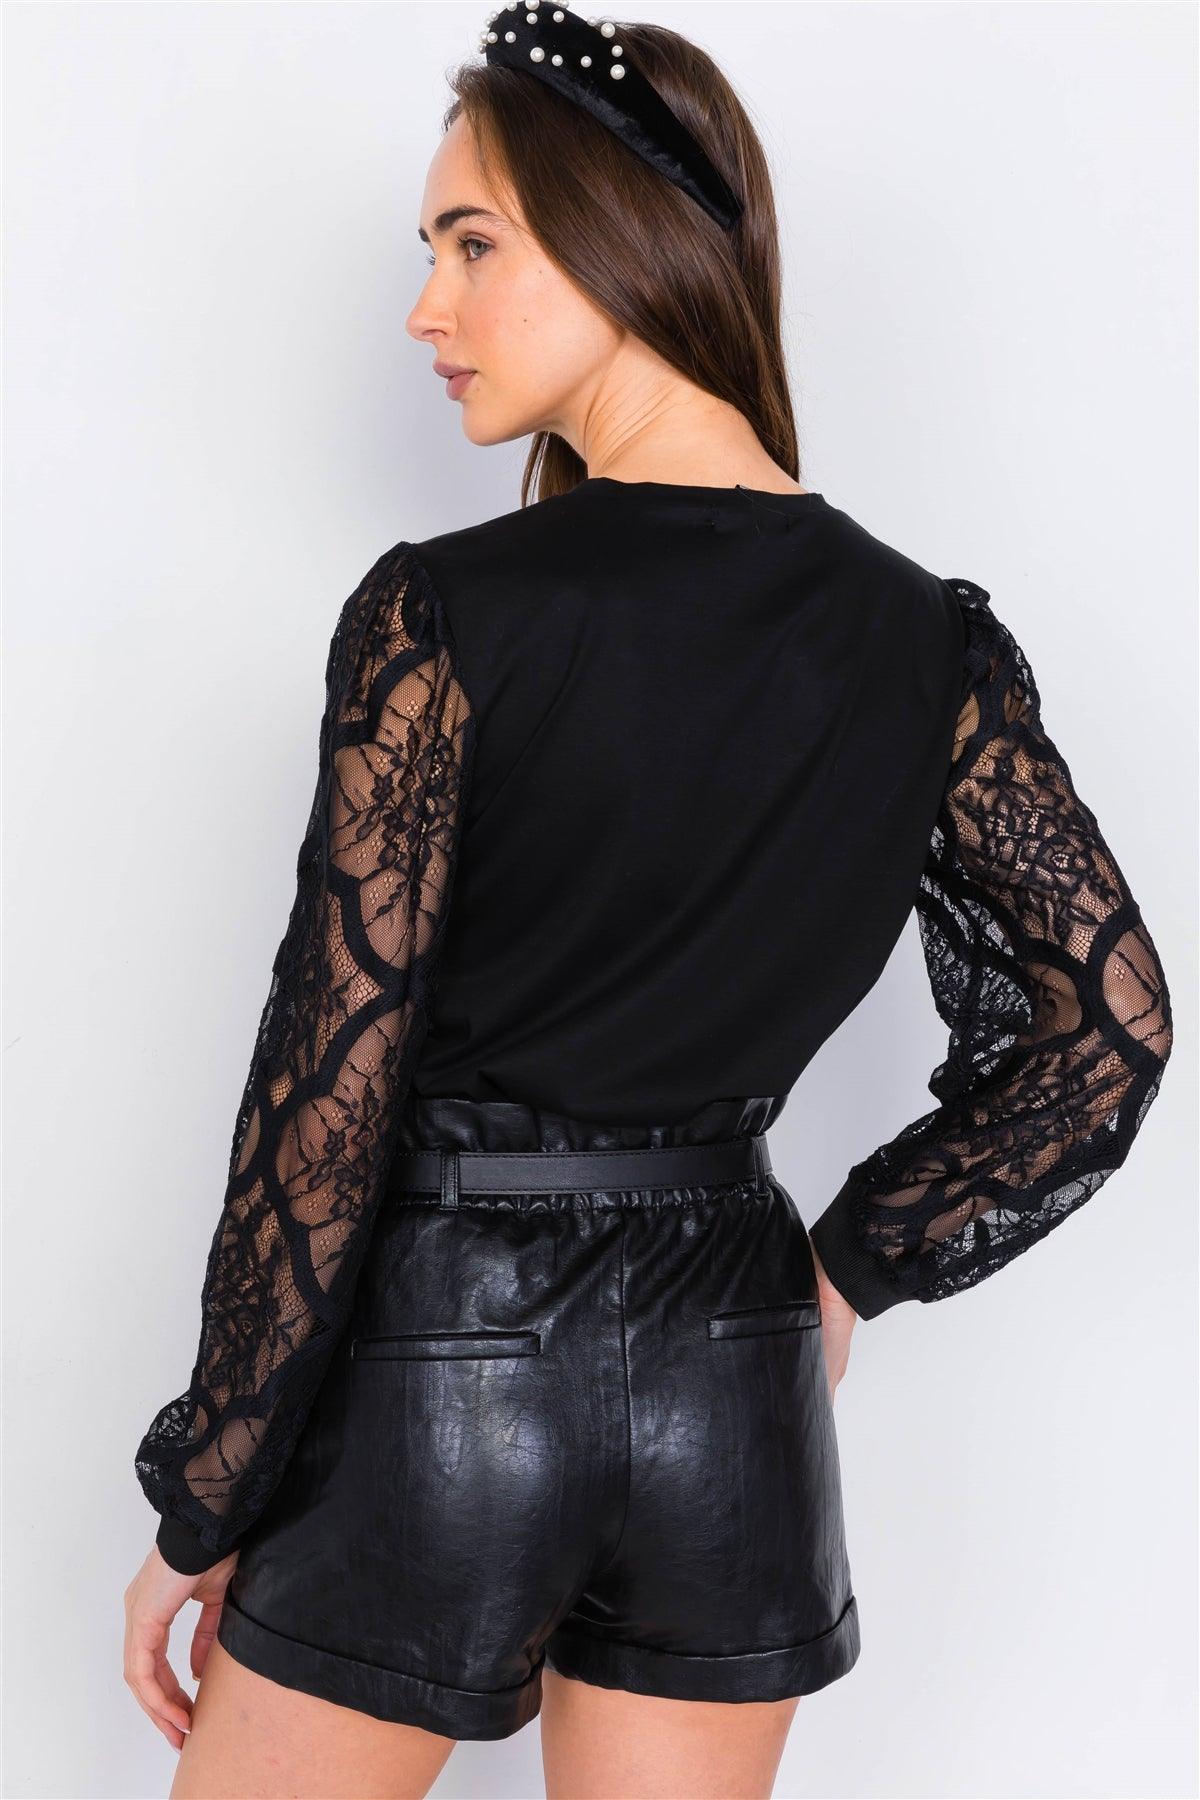 Black Lace Full Puff Sleeve Causal Office Chic Top